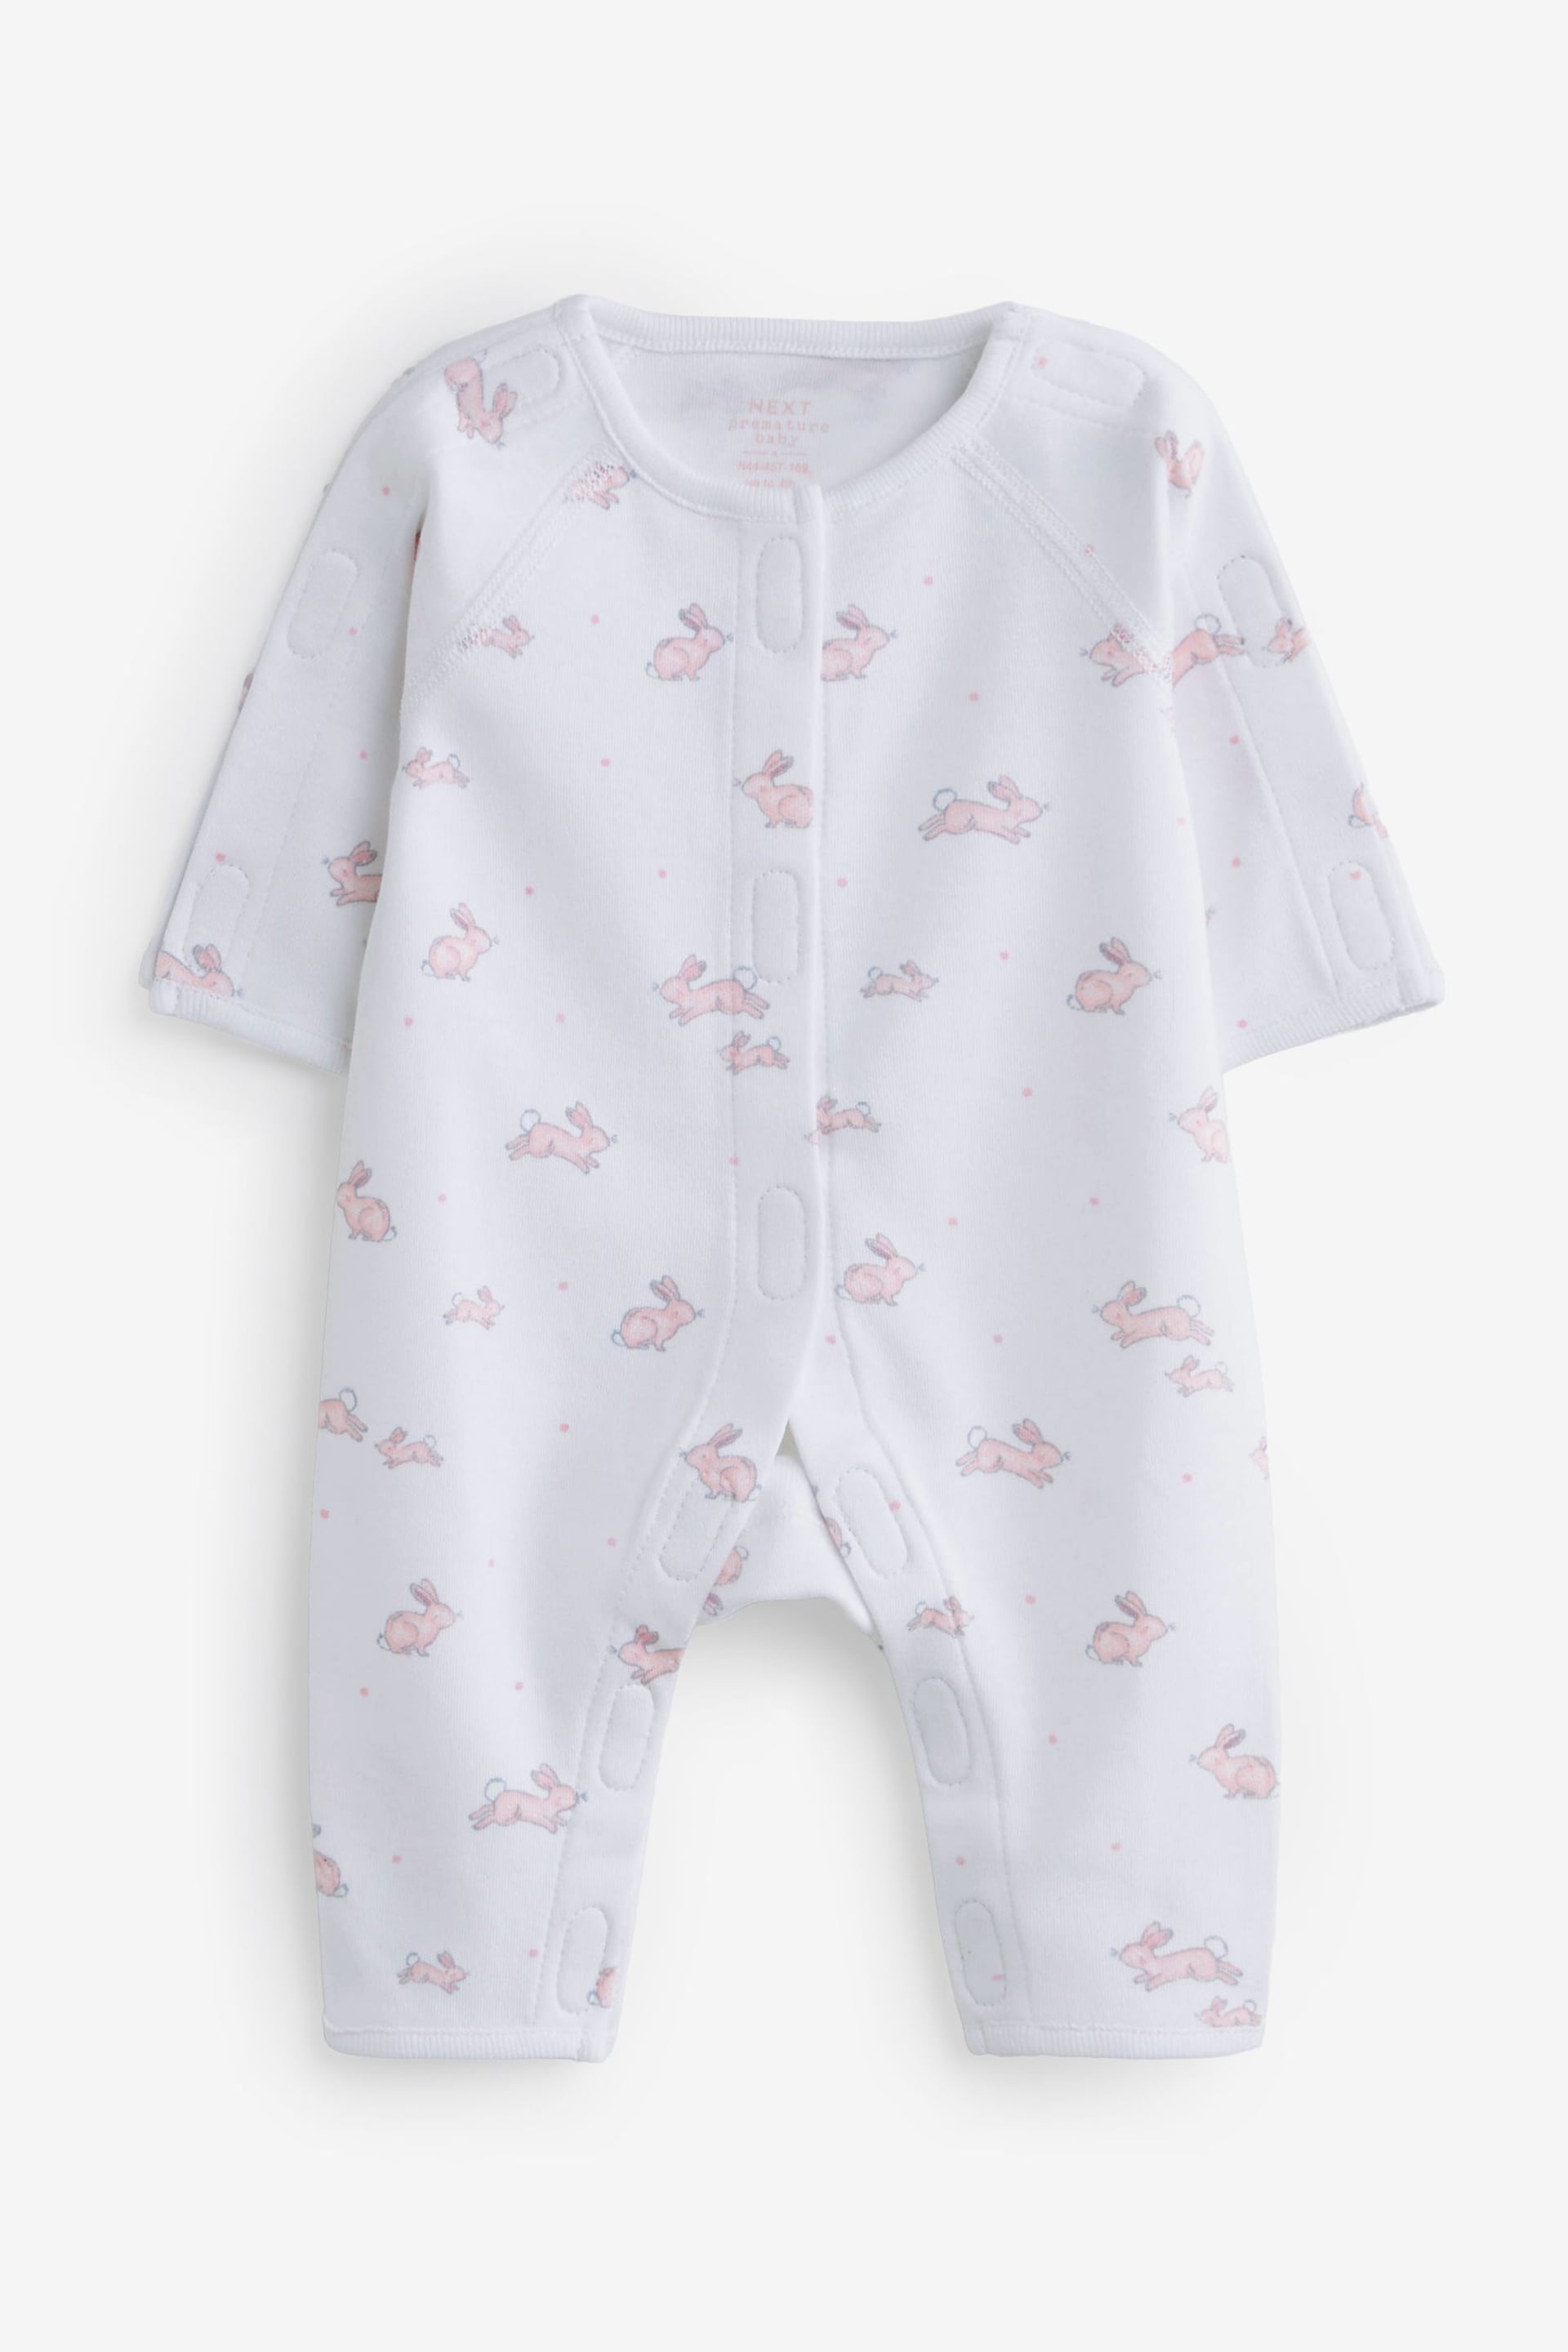 Pink Premature Baby Sleepsuits 3 Pack (0-0mths) - Image 3 of 6